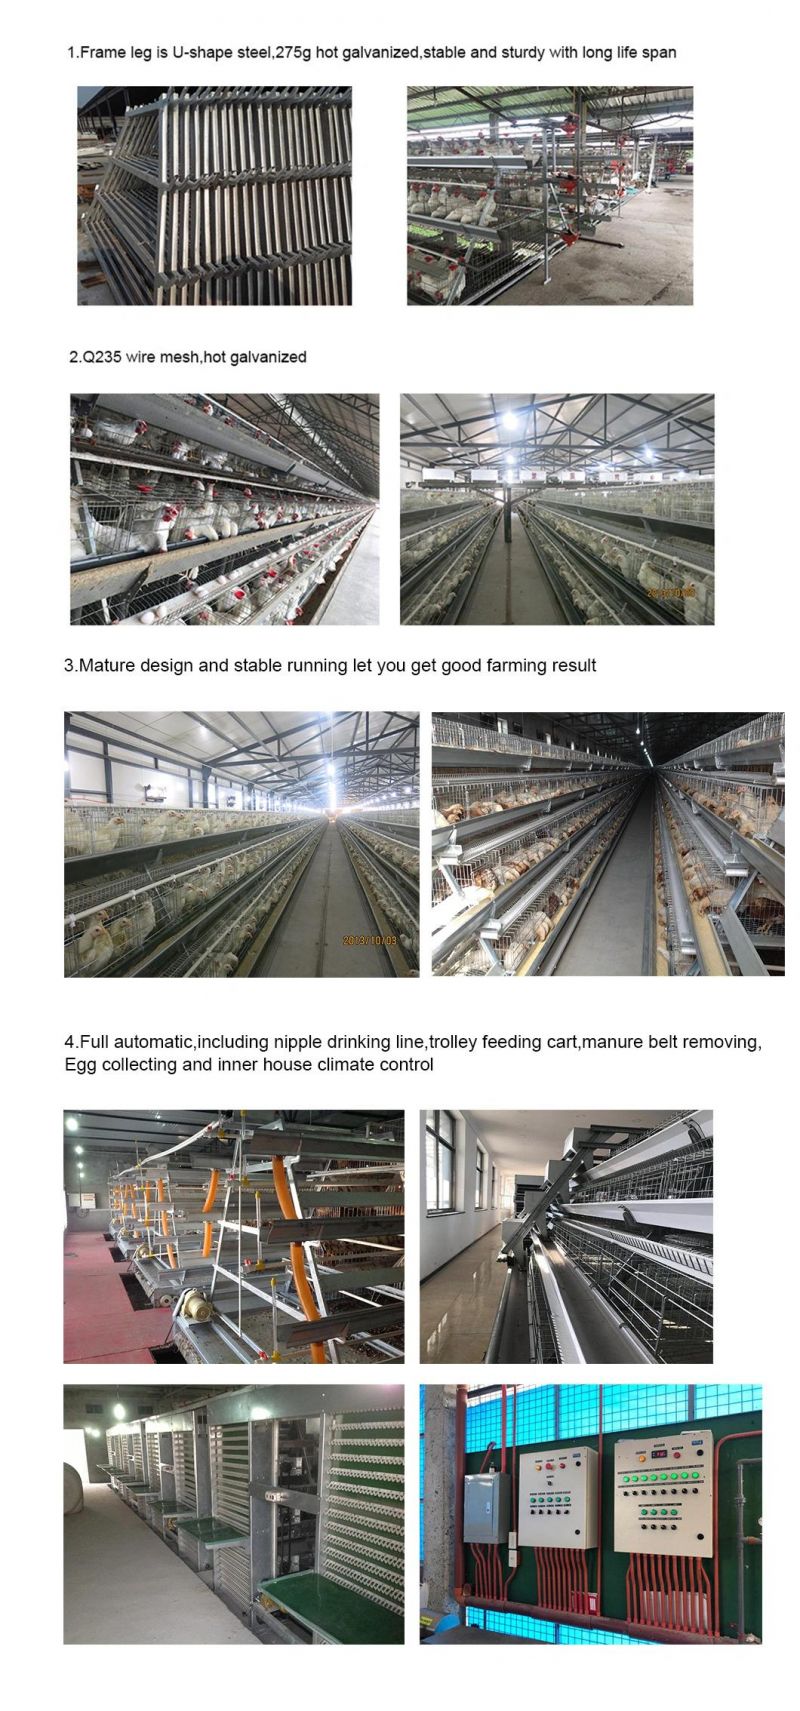 Longfeng High Quality 275g Hot Galvanized Wire Mesh and Sheet Poultry Farm Equipment